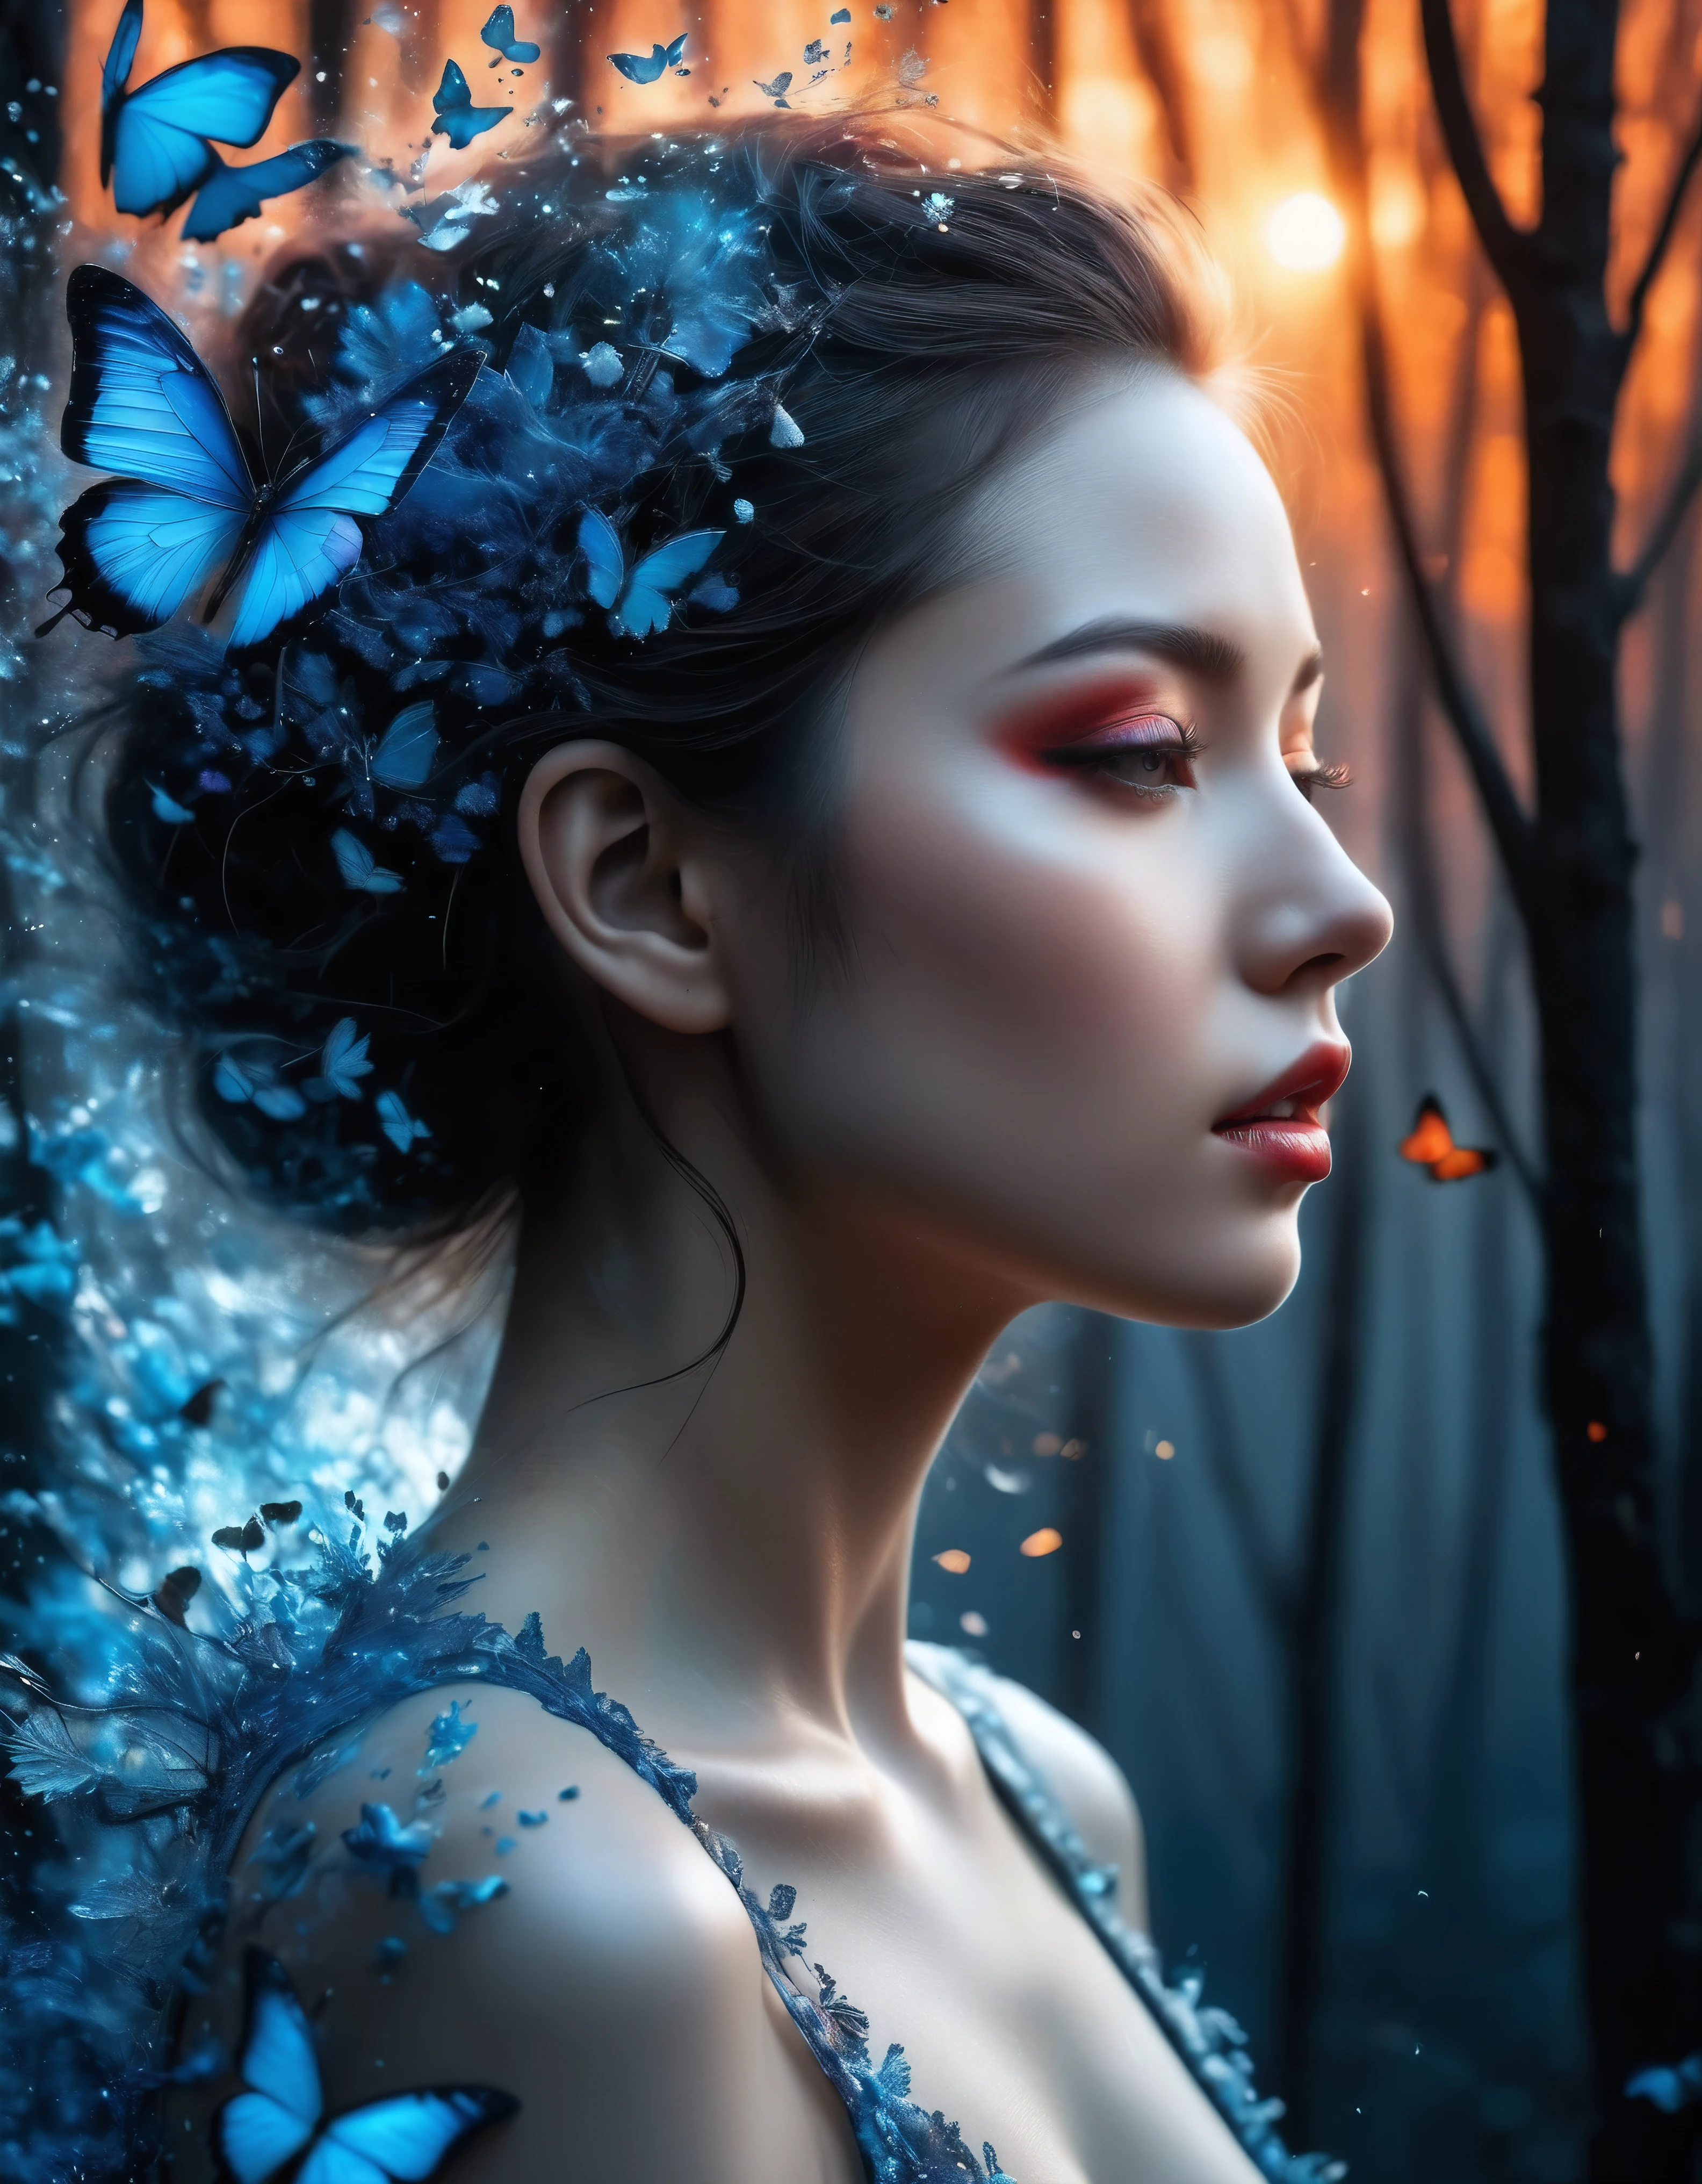 ((Masterpiece in maximum 16K resolution):1.6),((soft_color_photograpy:)1.5), ((Ultra-Detailed):1.4),((Movie-like still images and dynamic angles):1.3) | (double contact:1.3), Beautiful blue butterfly silhouette effect, Superimposed on Pretty Female《dark forest sky》Agnes Cecile, Jeremy Mann, Oil and ink on canvas, fine art, super dramatic light, photoillustration, amazing depth, the ultra-detailed, iridescent red, superfluous dreams, intricately details, amazing depth, Amazing atmosphere, Mesmerizing whimsical vibrant landscapes, Maximalism (beautiful outside, Ugly inside, pressure and pain, beauty and despair, hard and soft, positive and negative, hot and cold, Sweet and sour, Vibrant but boring, Perfect harmony, light and shadows, hot and cold, old and young, Fire and ice, Yin and yang, australian, Black and white, hot and cold, organic and mechanical, Corresponding color, loud and quiet, Chaos and peace, day and night:1.2) The complex masterpiece of a real-time engineering leader. | Rendered in ultra-high definition with UHD and retina quality, this masterpiece ensures anatomical correctness and textured skin with super detail. With a focus on high quality and accuracy, this award-winning portrayal captures every nuance in stunning 16k resolution, immersing viewers in its lifelike depiction. | ((perfect_composition, perfect_design, perfect_layout, perfect_detail, ultra_detailed)), ((enhance_all, fix_everything)), More Detail, Enhance.